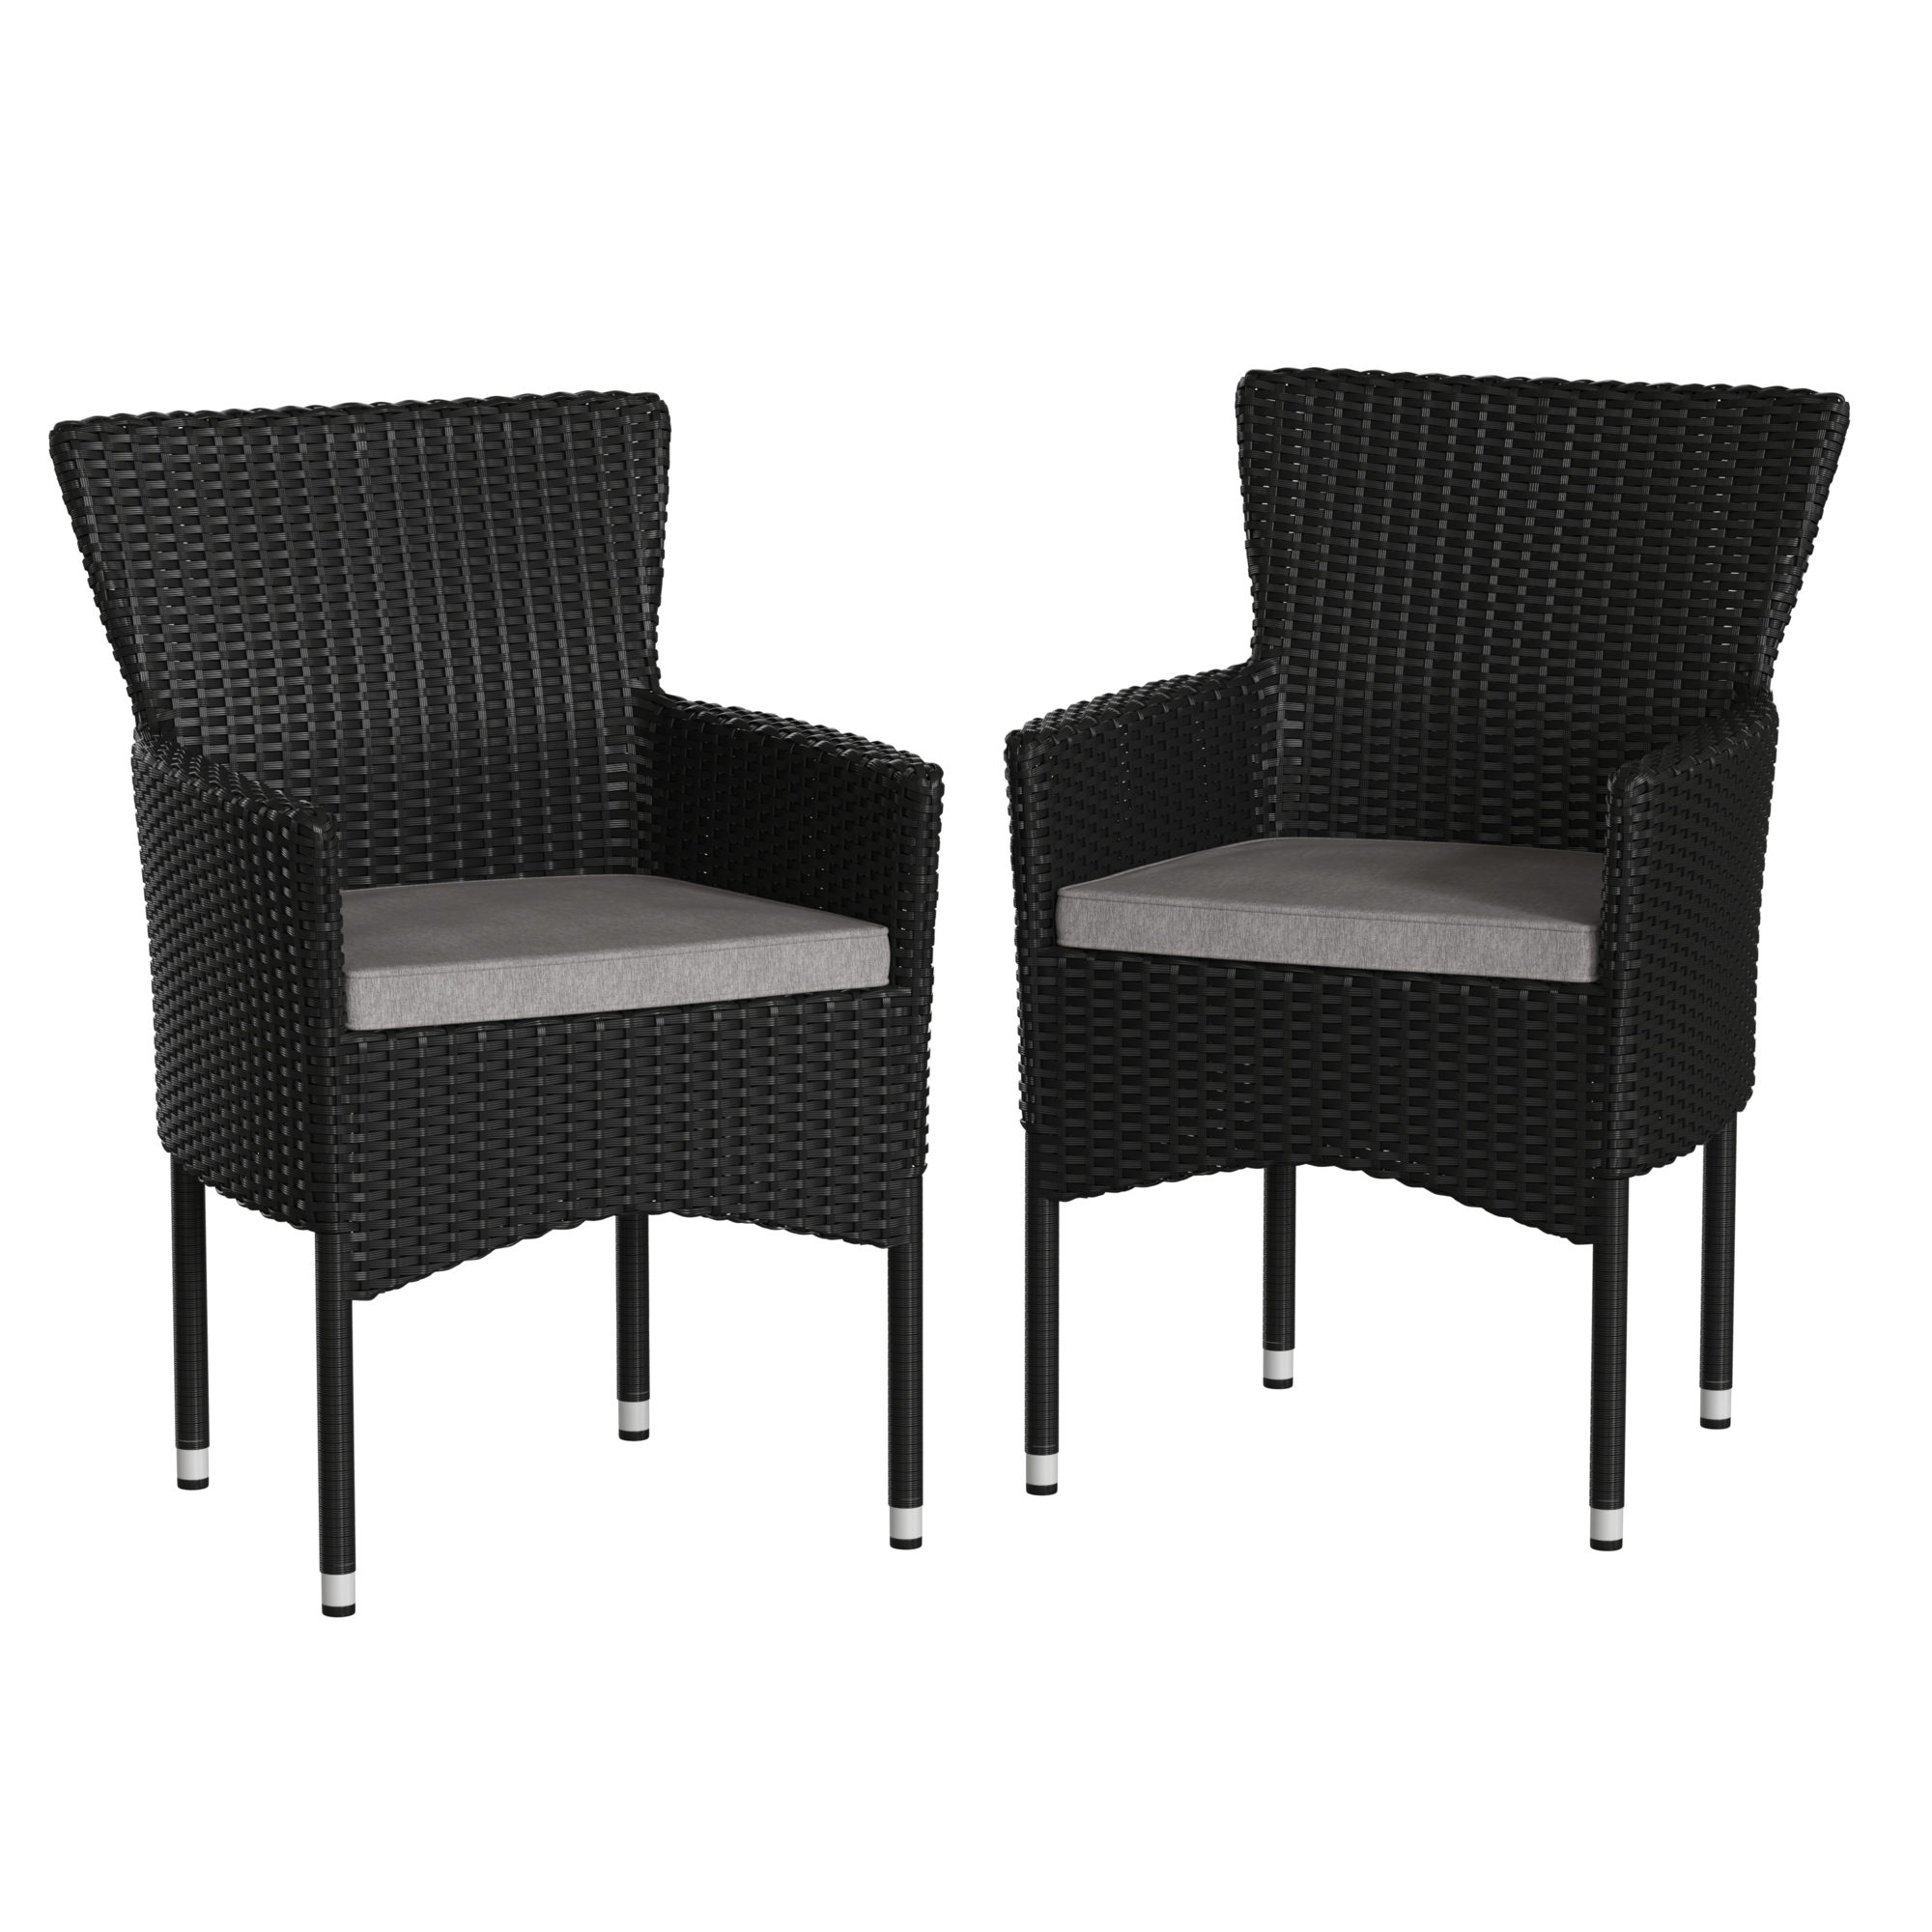 Flash Furniture, 2PK Black Wicker Patio Chairs Cream Cushions, Primary Color Black, Material Polyester, Width 22.5 in, Model 2TW3WBE074BK